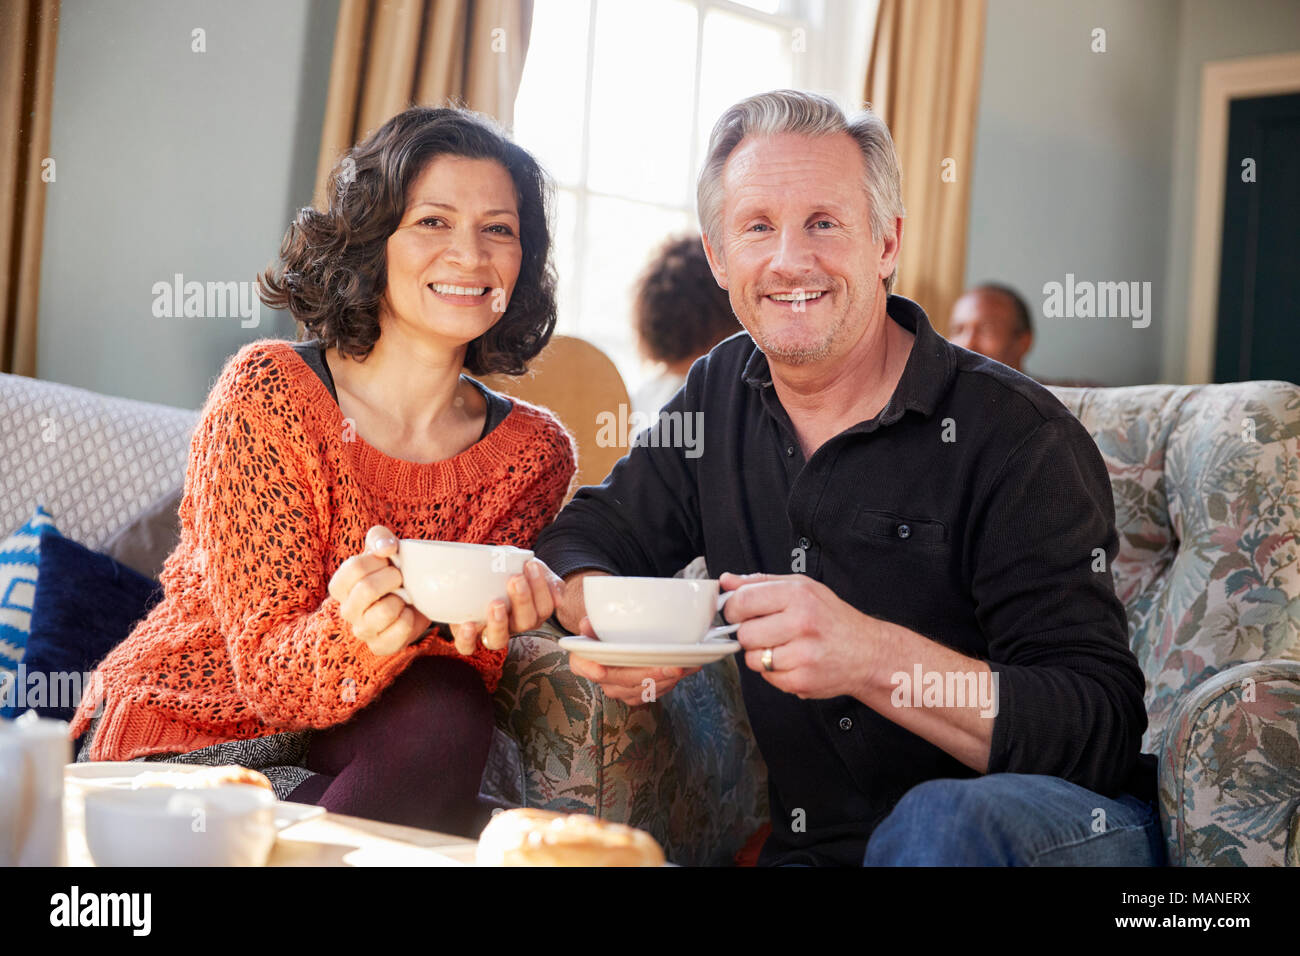 Portrait Of Middle Aged Couple Meeting In Coffee Shop Stock Photo